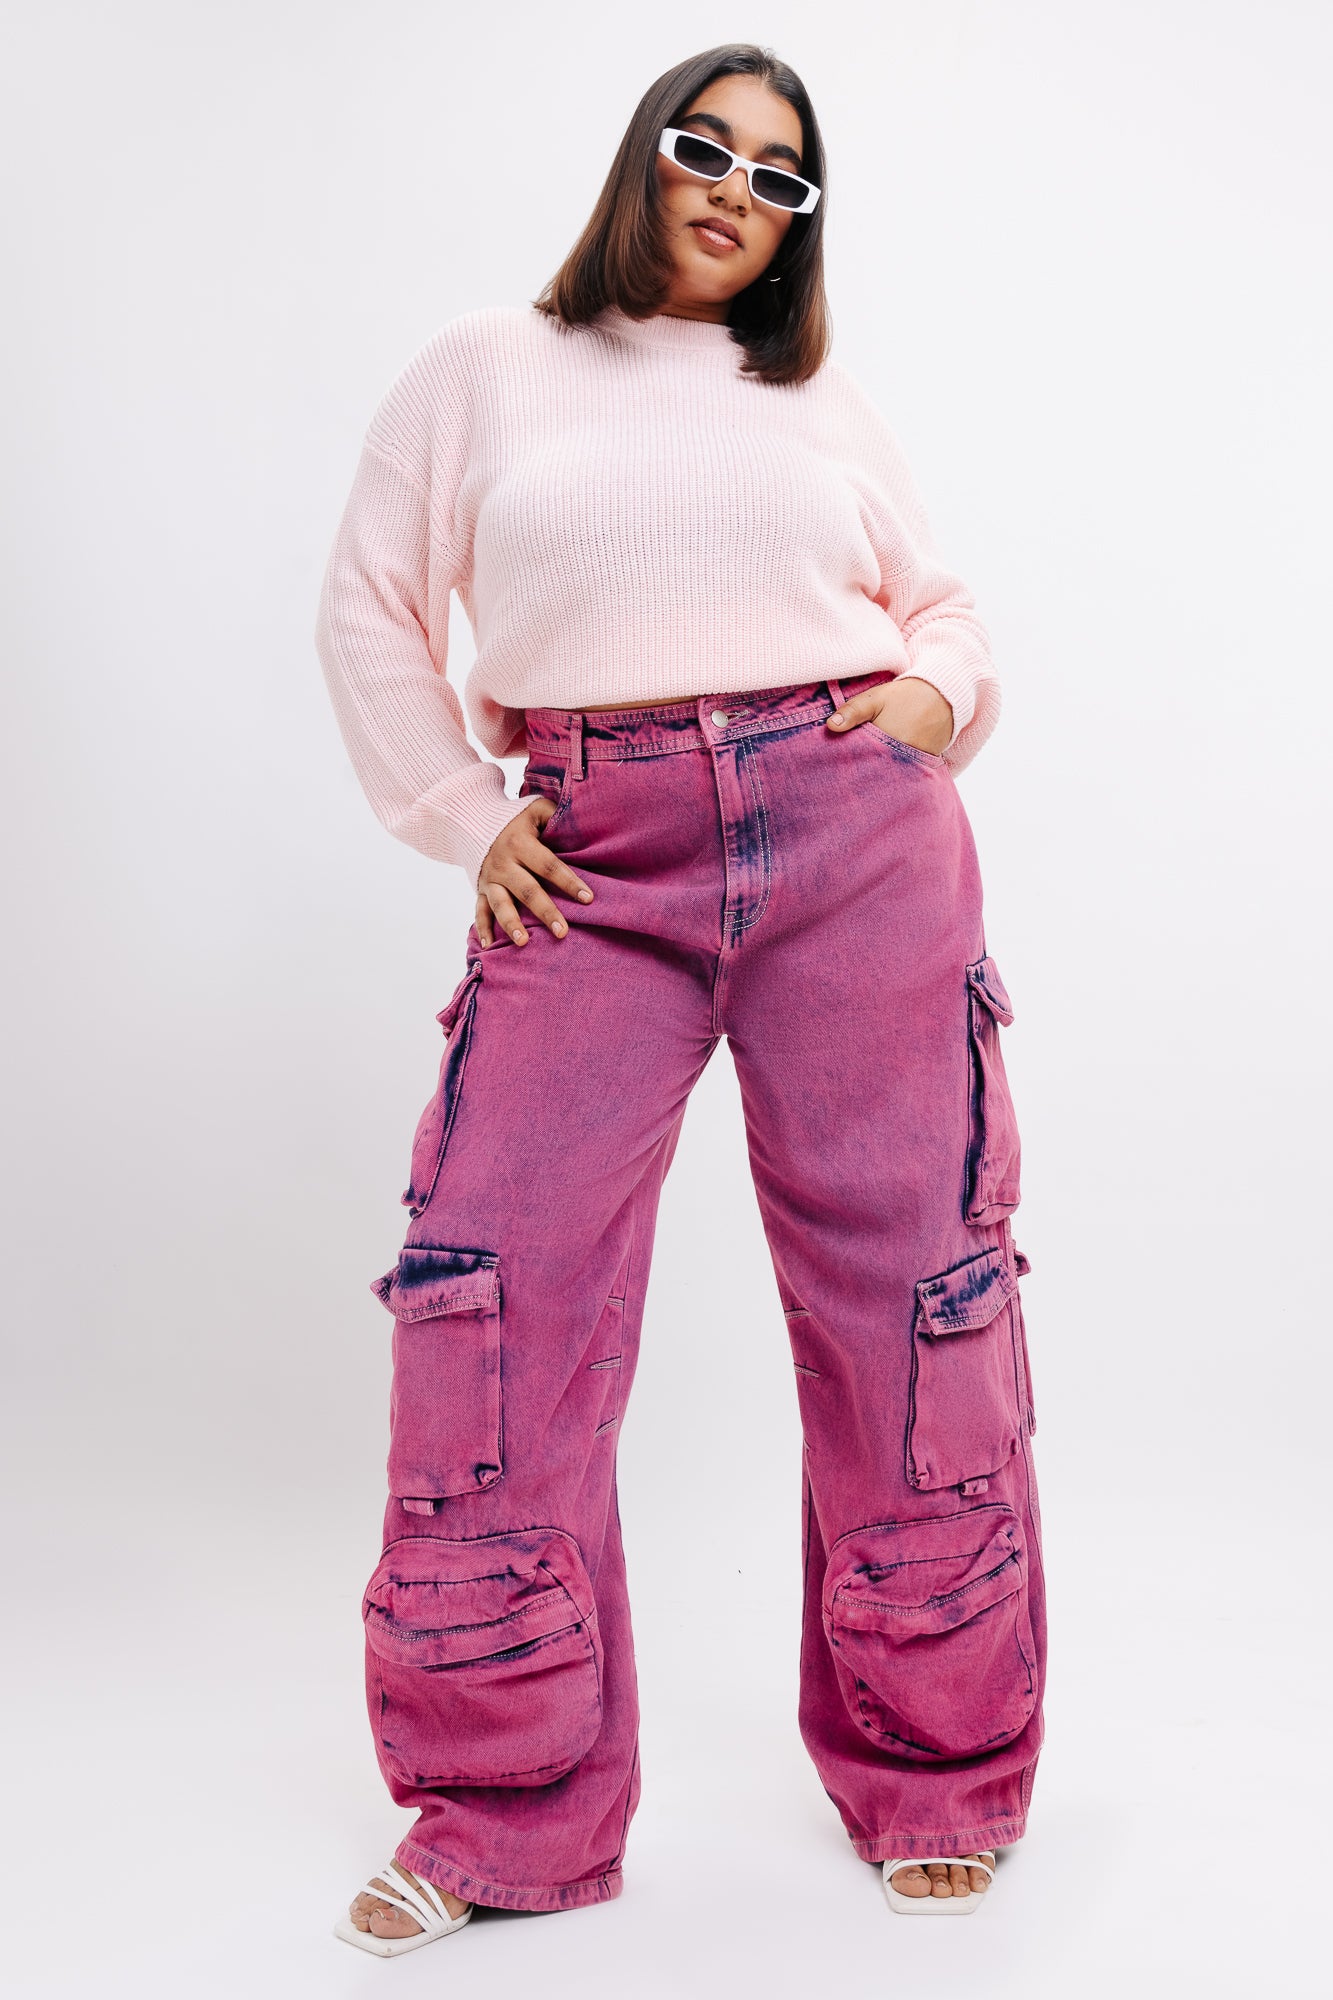 House of Tinks - All things Pink Cargo Pants and Not so basic